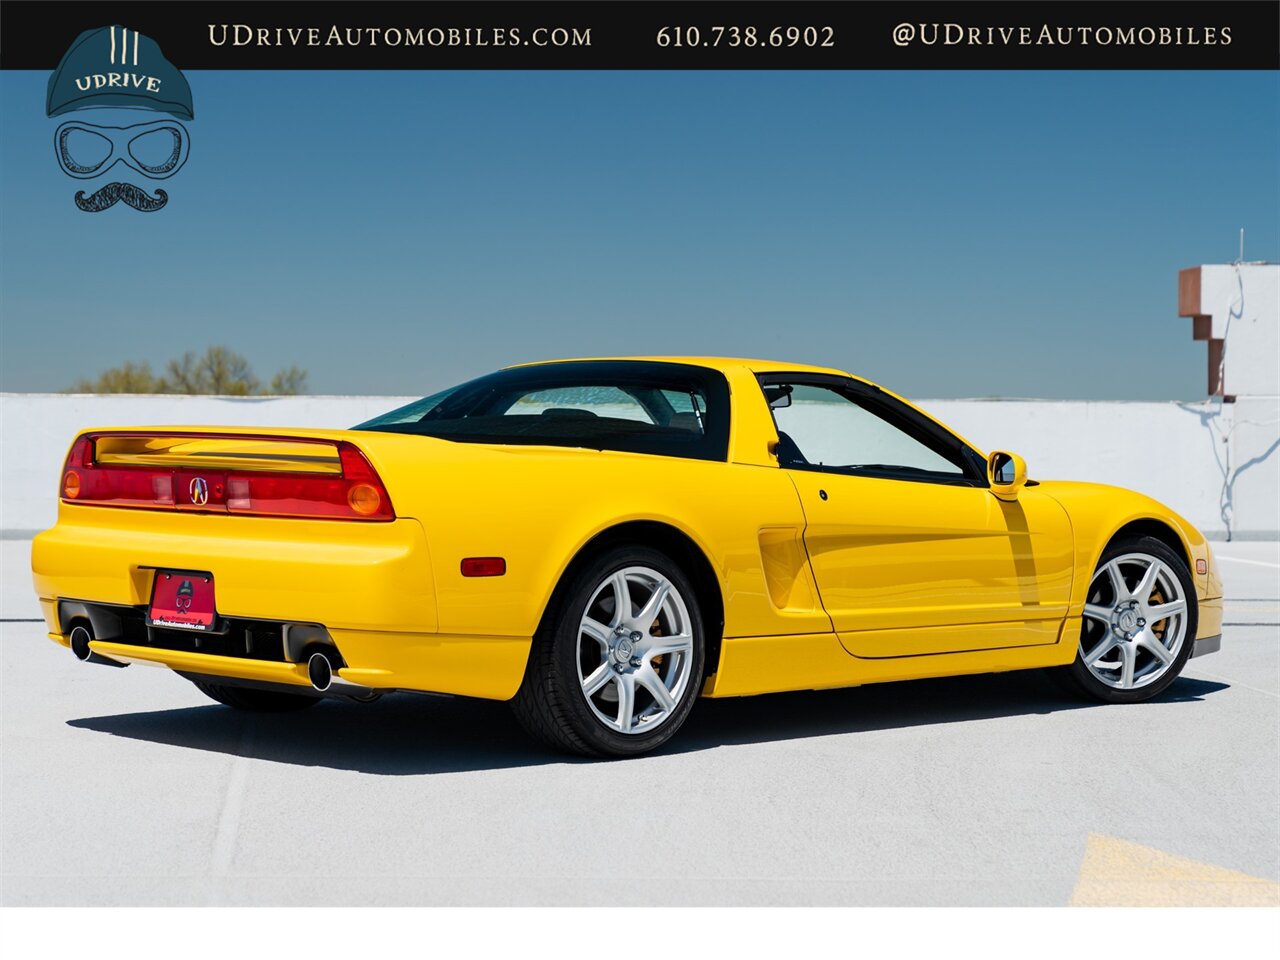 2003 Acura NSX NSX-T  Spa Yellow over Yellow Lthr 1 of 13 Produced - Photo 2 - West Chester, PA 19382